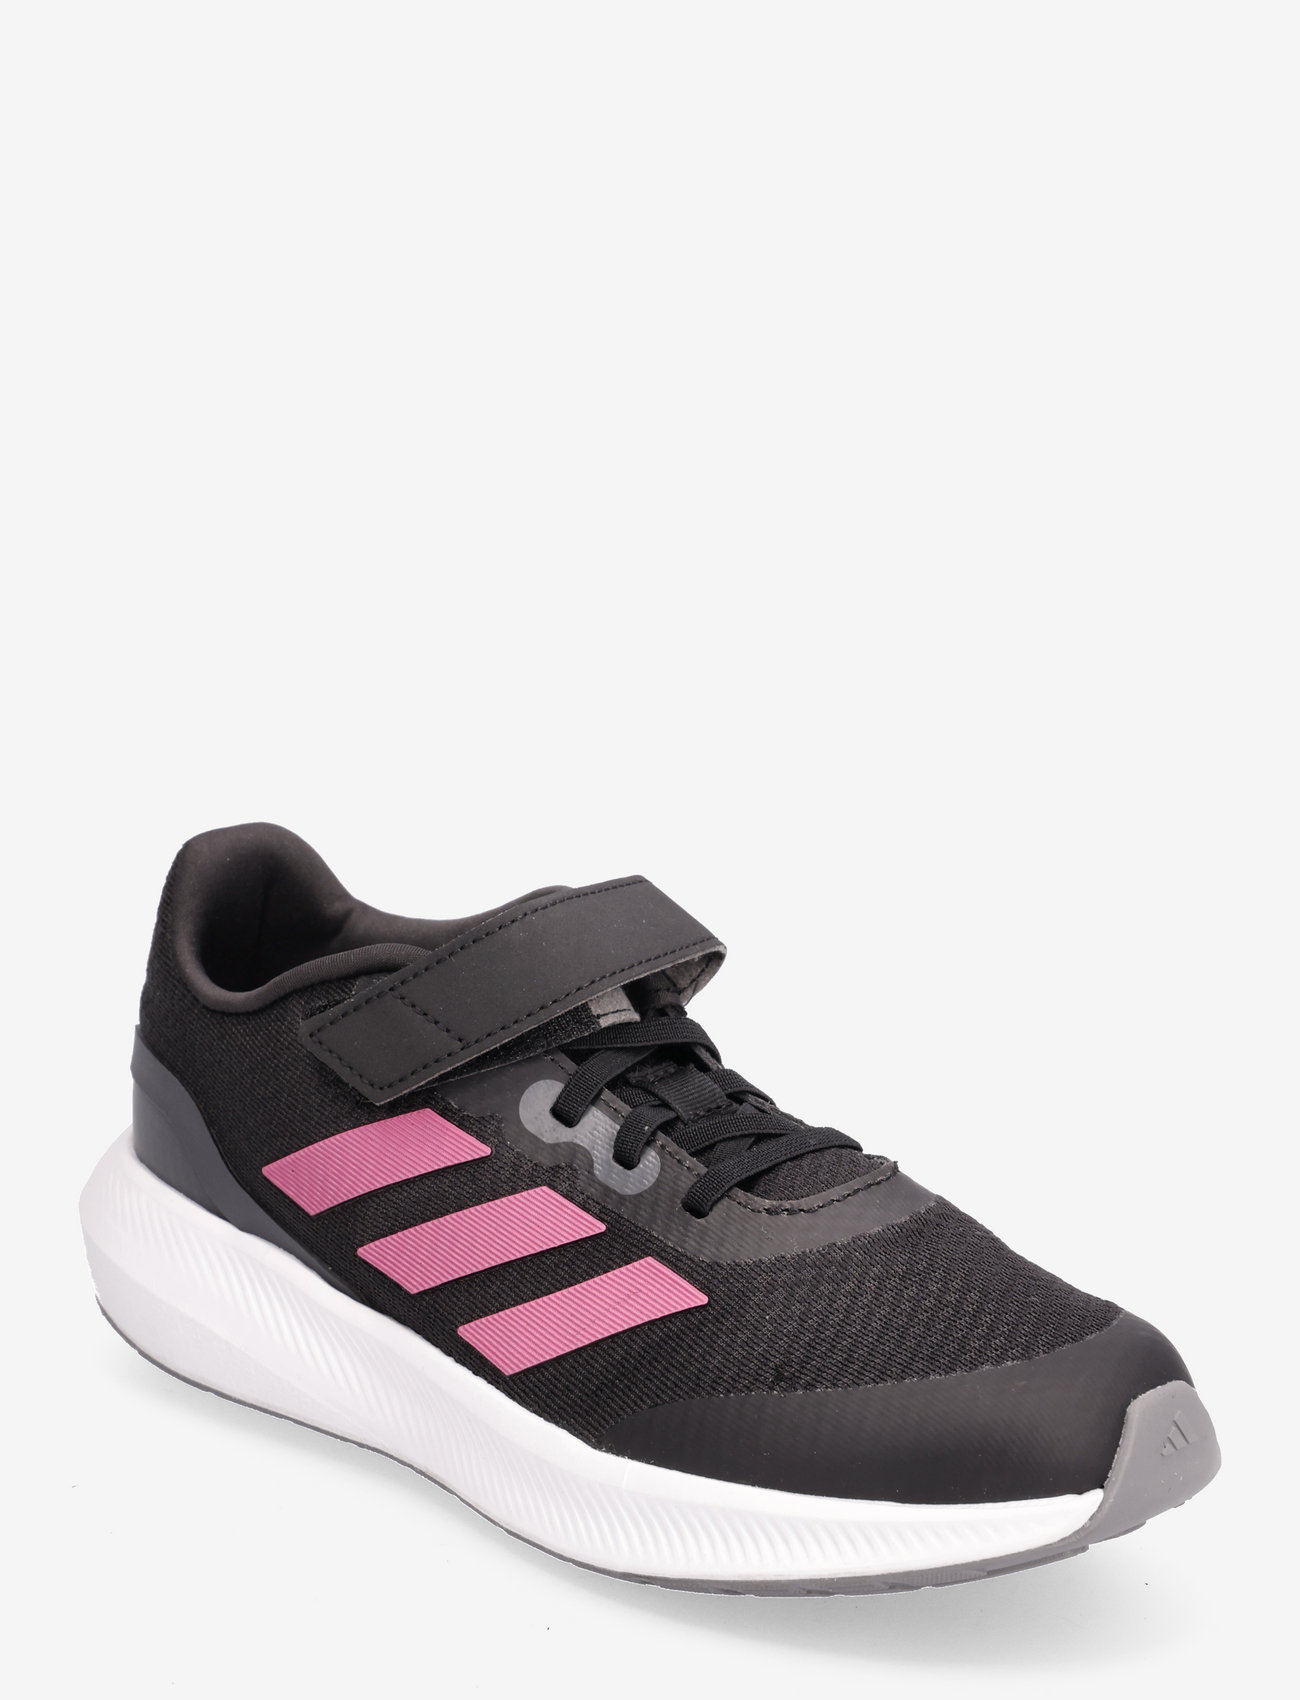 adidas Performance Runfalcon 3.0 Elastic Lace Top Strap Shoes - Sneakers -  Booztlet.com Österreich